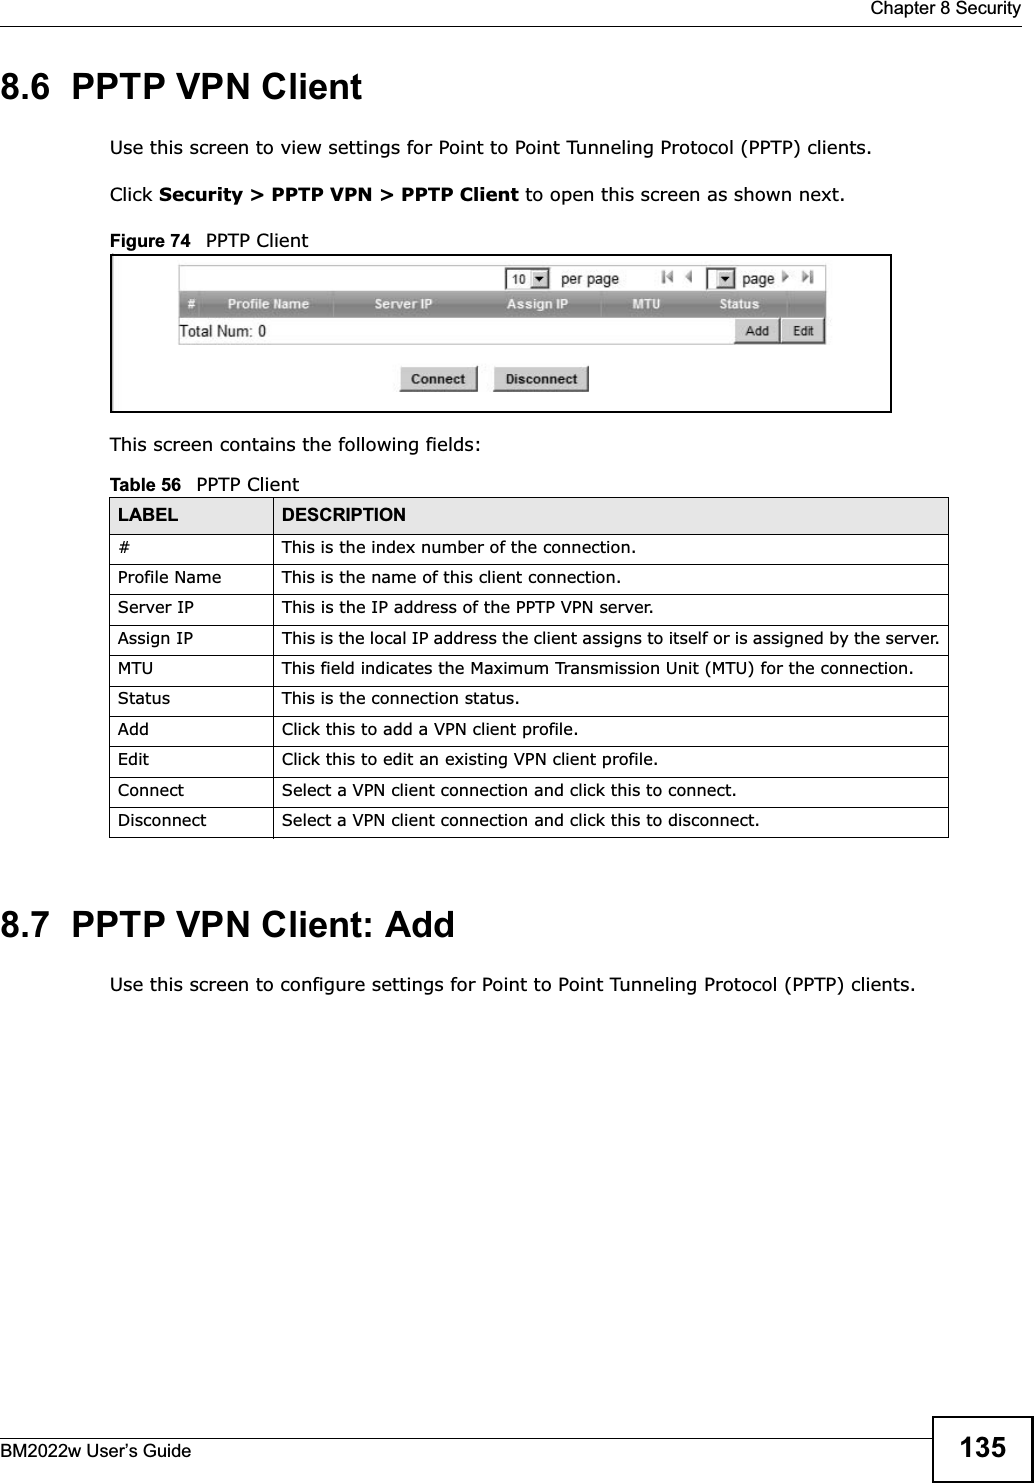  Chapter 8 SecurityBM2022w User’s Guide 1358.6  PPTP VPN ClientUse this screen to view settings for Point to Point Tunneling Protocol (PPTP) clients.Click Security &gt; PPTP VPN &gt; PPTP Client to open this screen as shown next.Figure 74   PPTP ClientThis screen contains the following fields:8.7  PPTP VPN Client: AddUse this screen to configure settings for Point to Point Tunneling Protocol (PPTP) clients.Table 56   PPTP ClientLABEL DESCRIPTION# This is the index number of the connection.Profile Name This is the name of this client connection.Server IP This is the IP address of the PPTP VPN server.Assign IP This is the local IP address the client assigns to itself or is assigned by the server.MTU This field indicates the Maximum Transmission Unit (MTU) for the connection.Status This is the connection status.Add Click this to add a VPN client profile.Edit Click this to edit an existing VPN client profile.Connect Select a VPN client connection and click this to connect.Disconnect Select a VPN client connection and click this to disconnect.